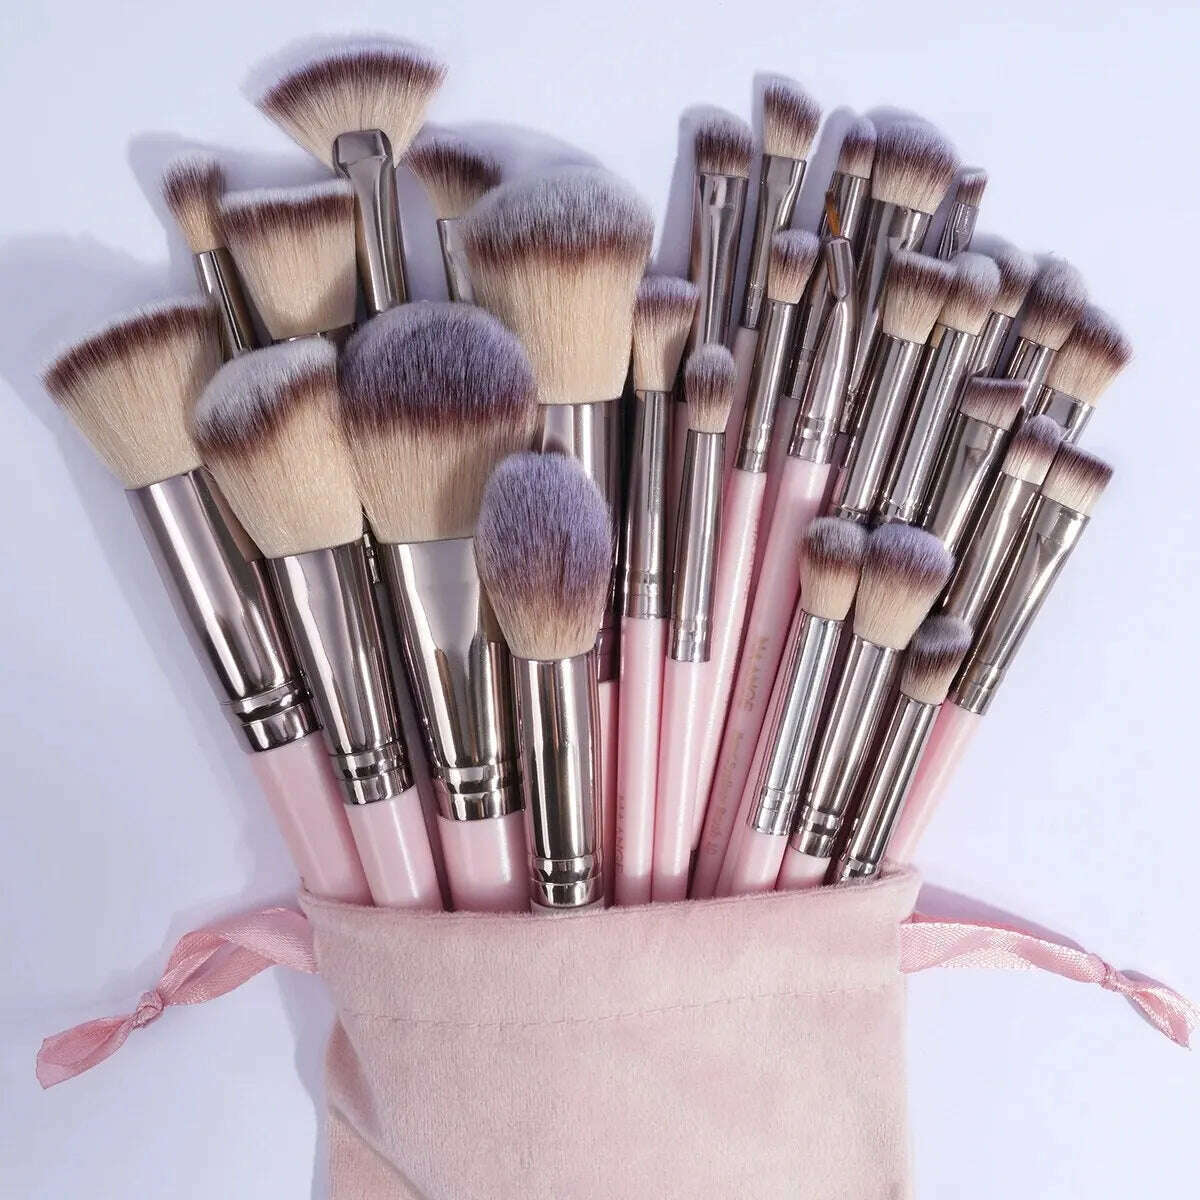 KIMLUD, MAANGE 30pcs Professional Makeup Brush Set Foundation Concealers Eye Shadows Powder Blush Blending Brushes Beauty Tools with Bag, Pink Coffee, KIMLUD Women's Clothes